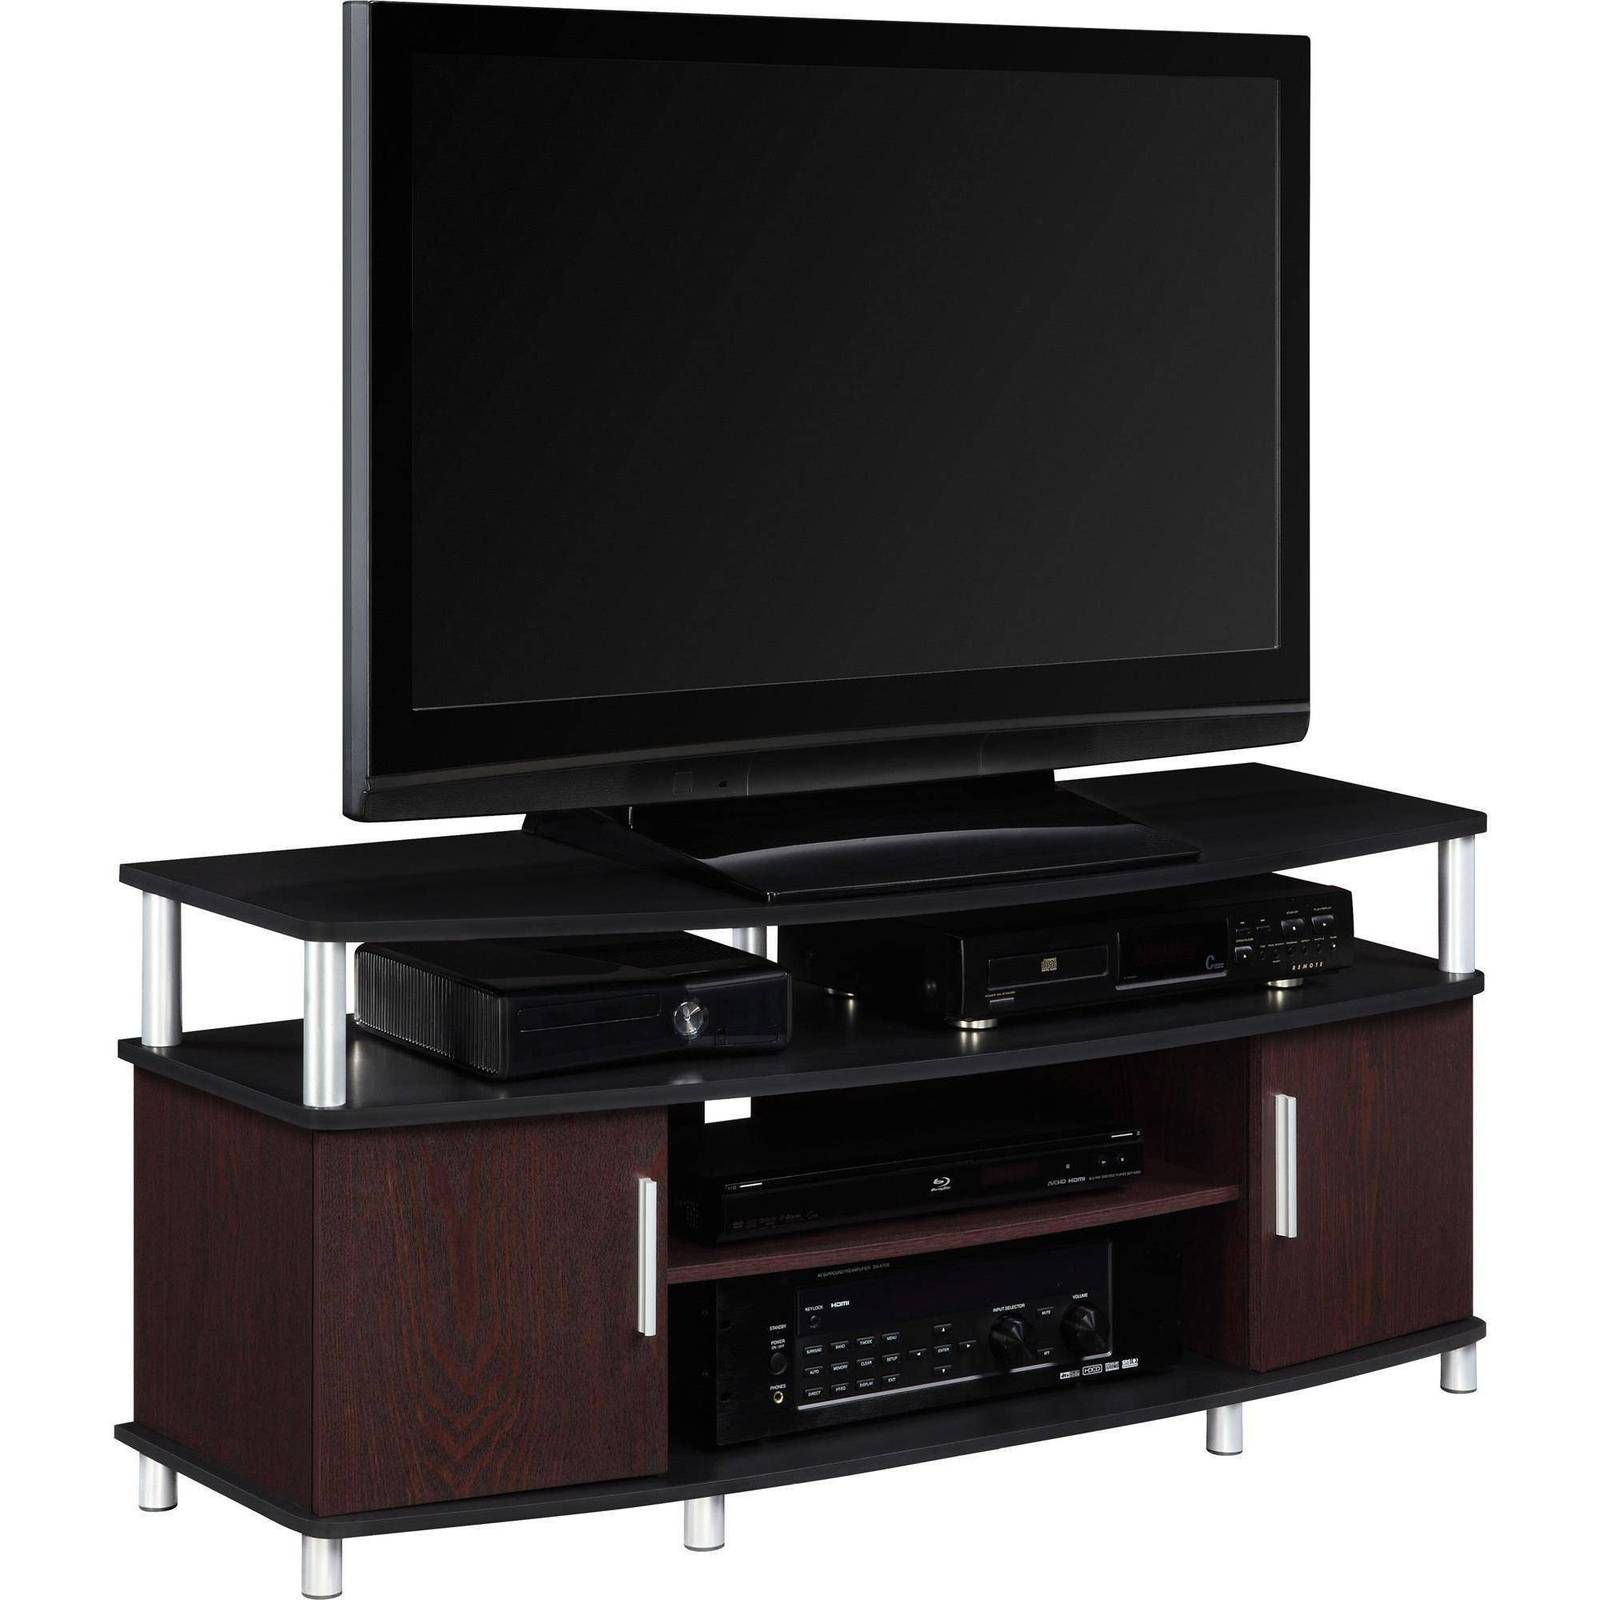 Tv Stand Entertainment Center Media Home Furniture Storage Intended For Black Modern Tv Stands (View 9 of 15)